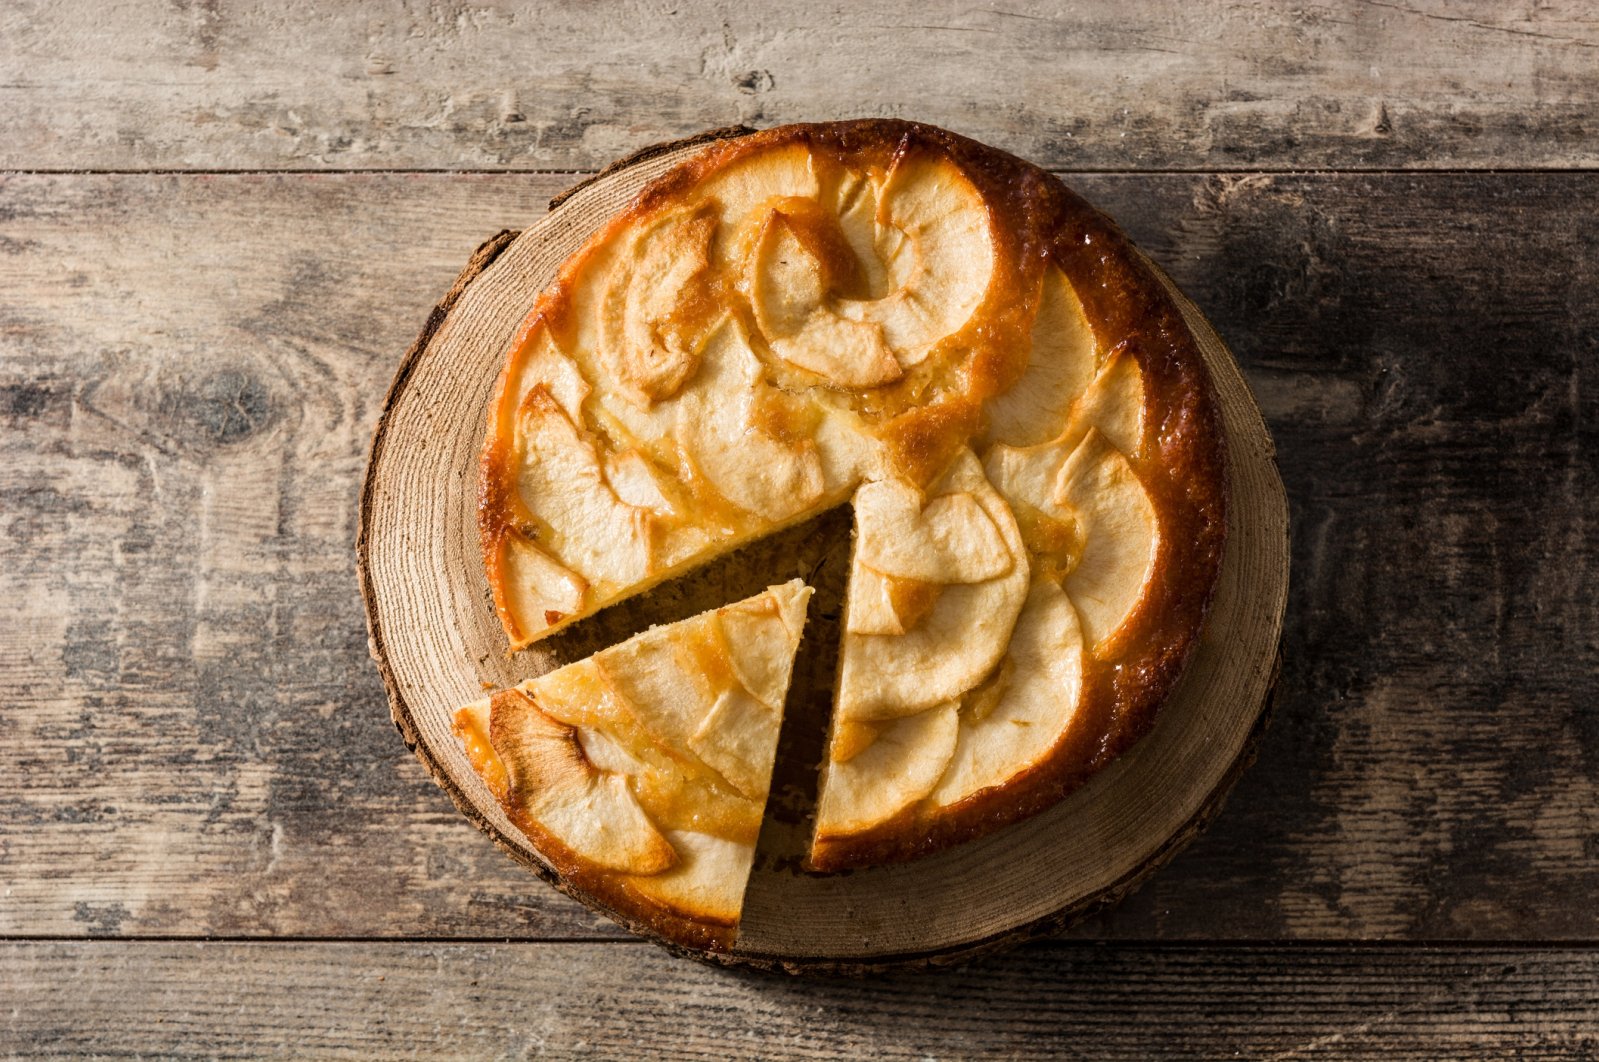 An apple cake is easier and less time-consuming than baking an intricate pie. (iStock Photo)